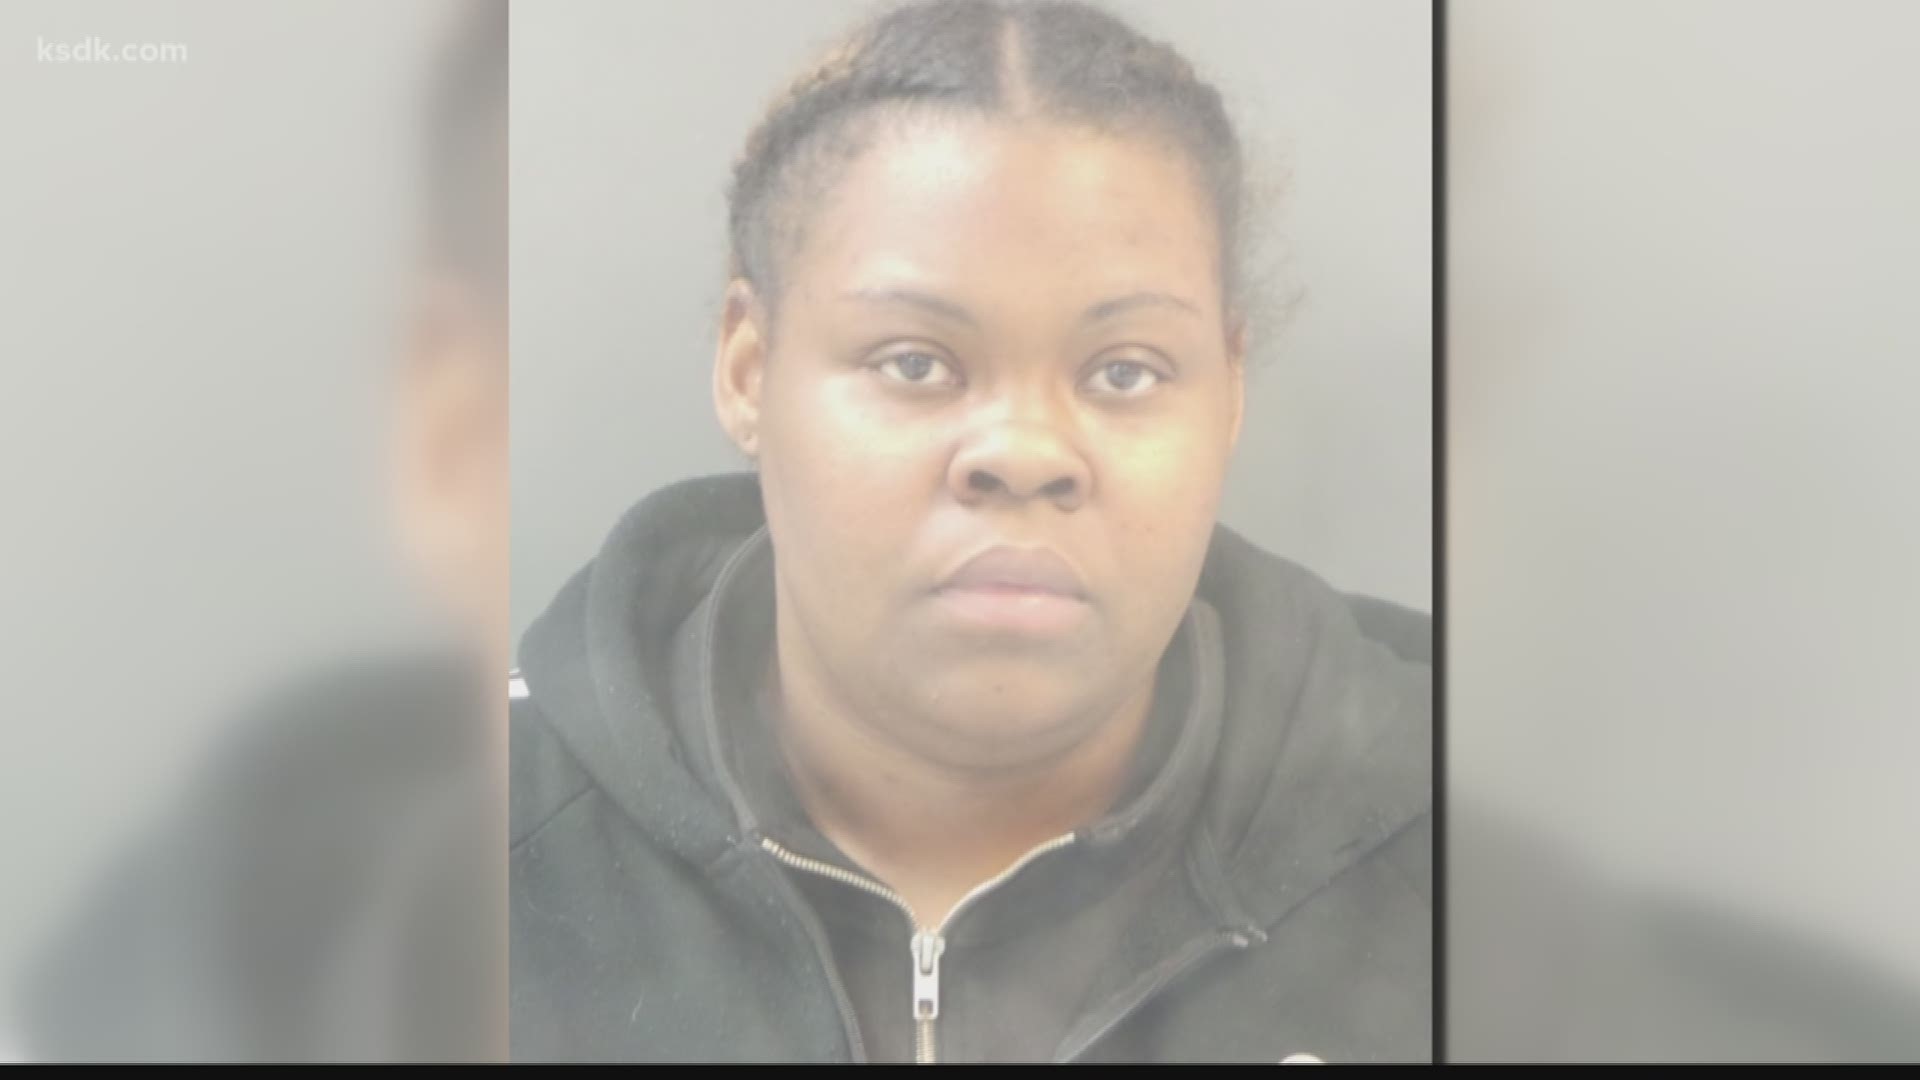 Ty'Andra Keniece Williams has been charged with third-degree assault, five counts of endangering the welfare of a child and trespassing of a school bus.